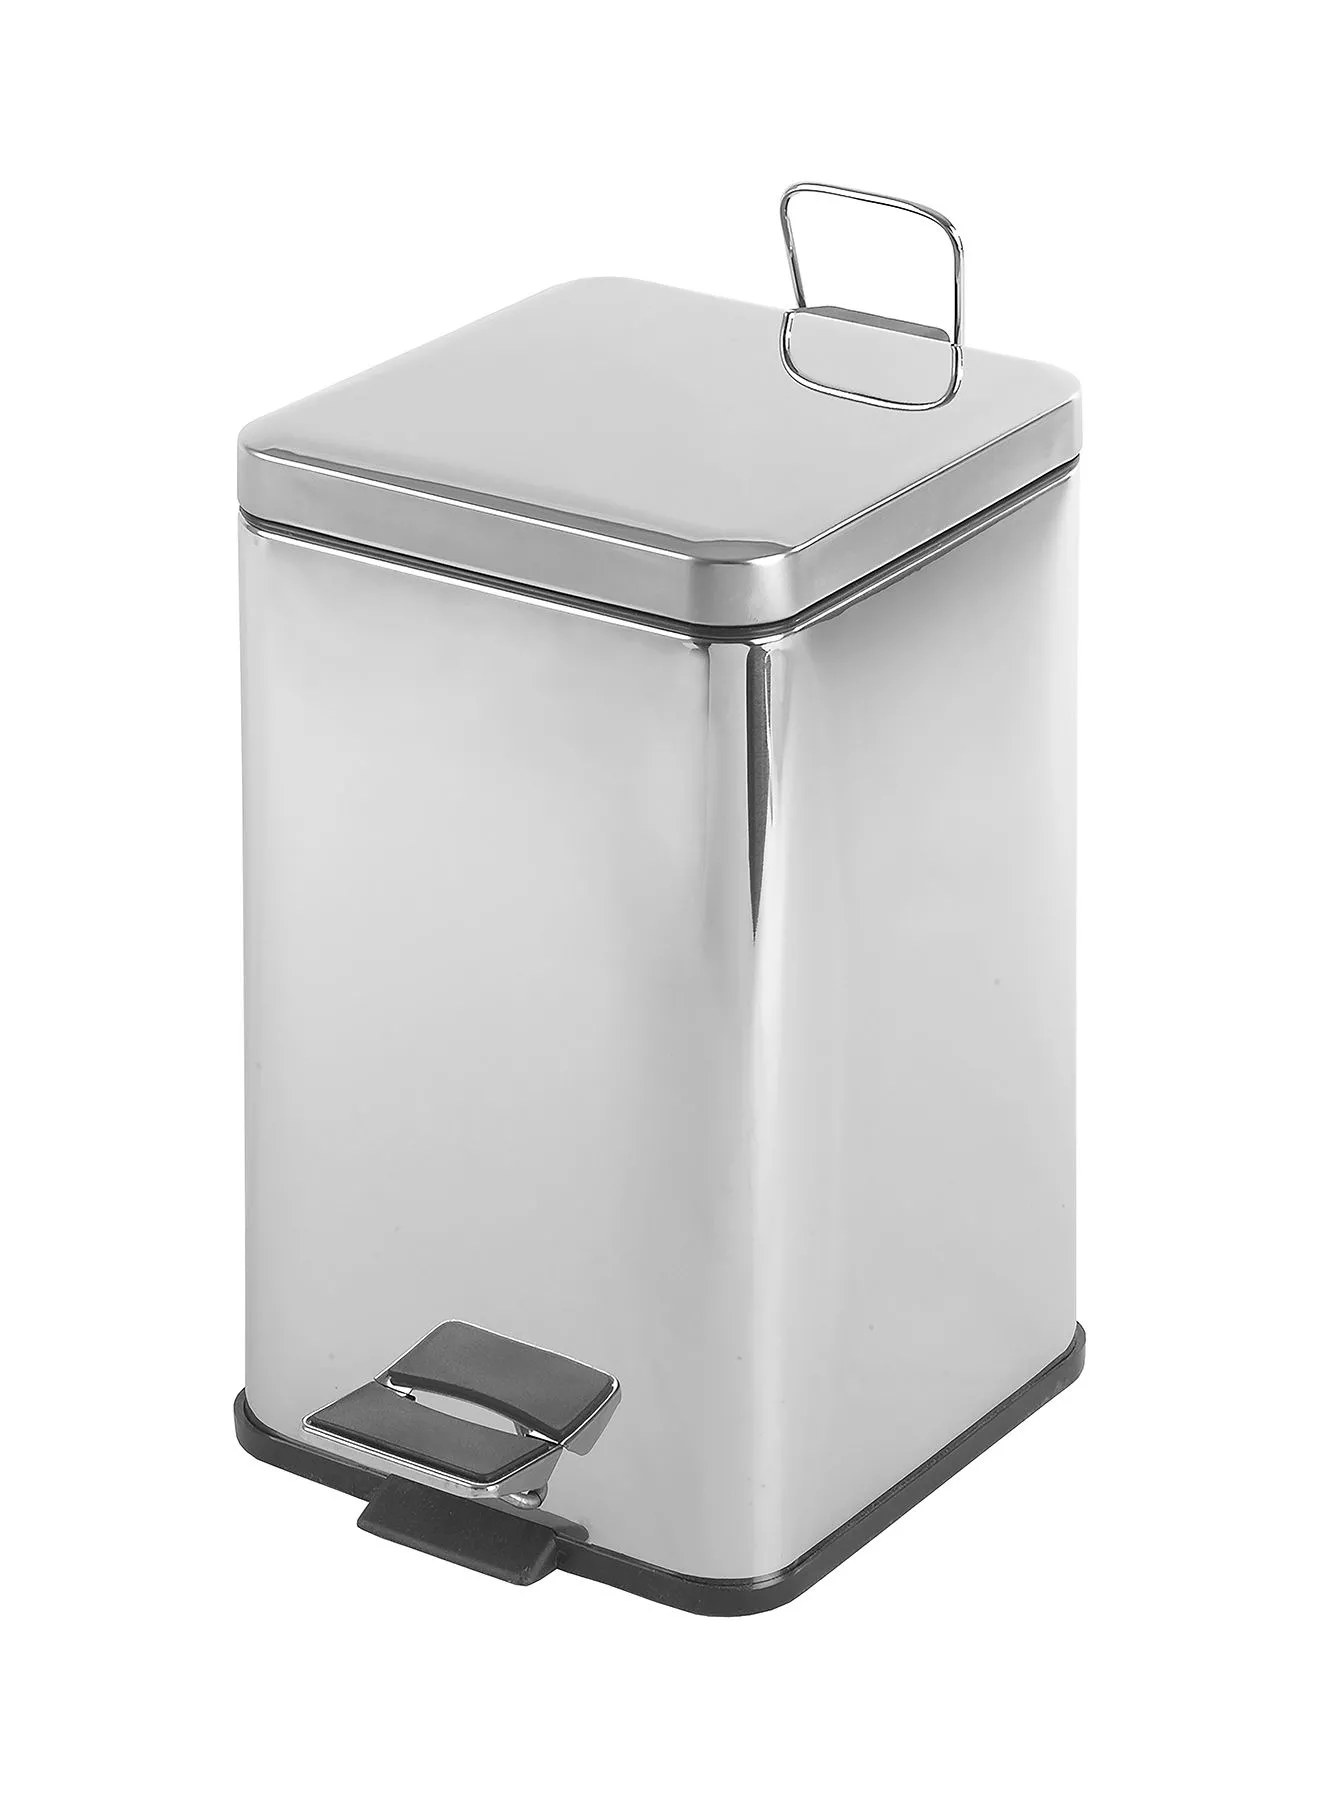 Amal Pedal Trash Bin Stainless Steel For Bathroom Kitchen Rooms And Offices Silver 20 x 20 x 29.5cm